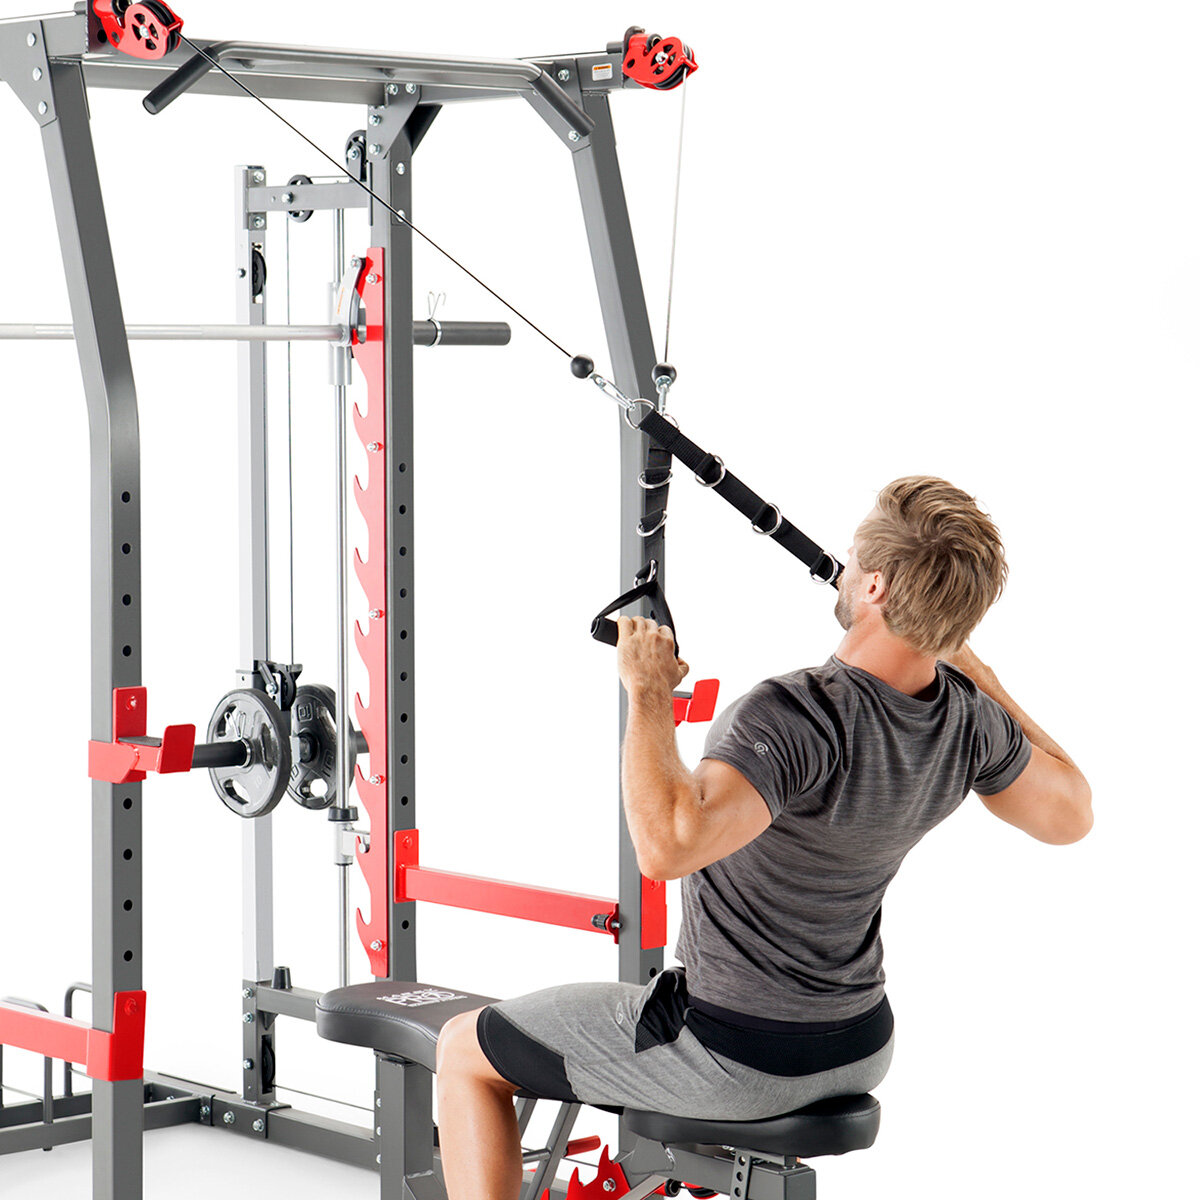 Marcy SM-4903 Smith Machine and Bench